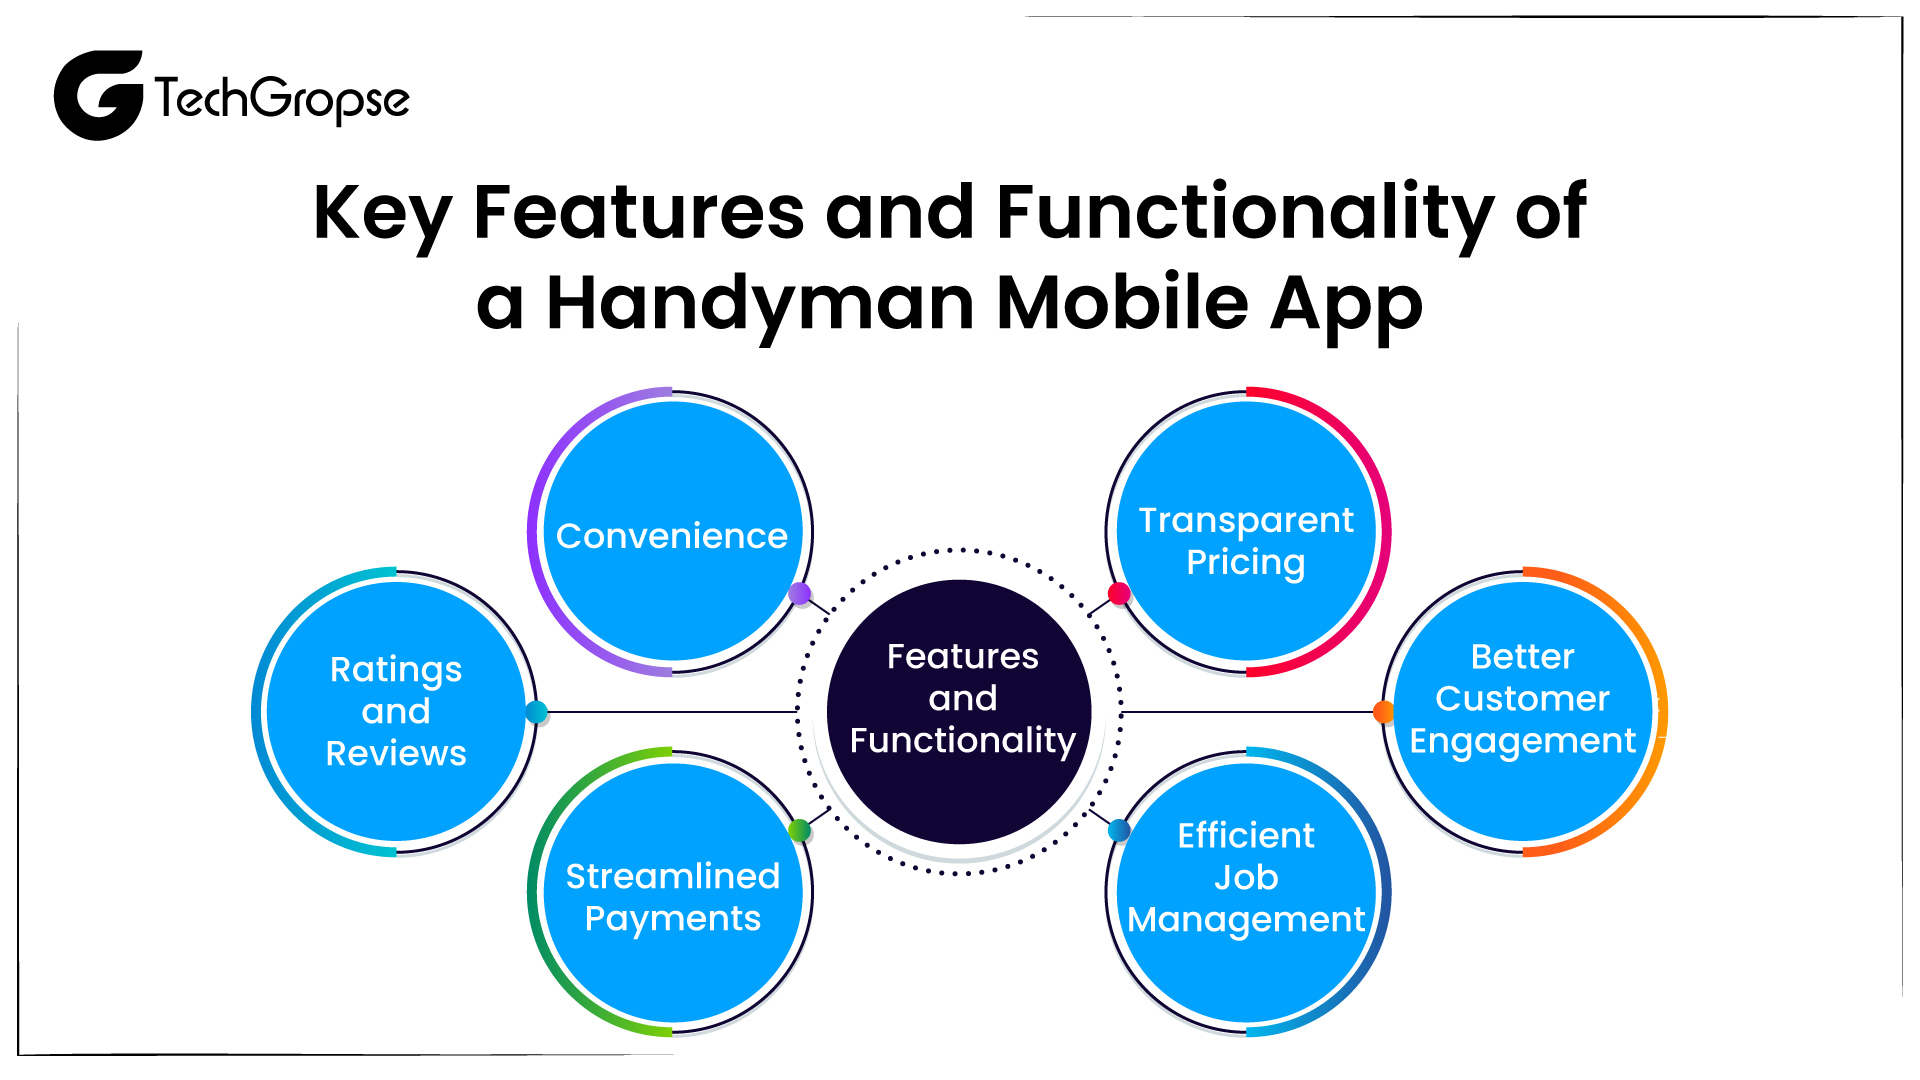 Key Features and Functionality of a Handyman Mobile App